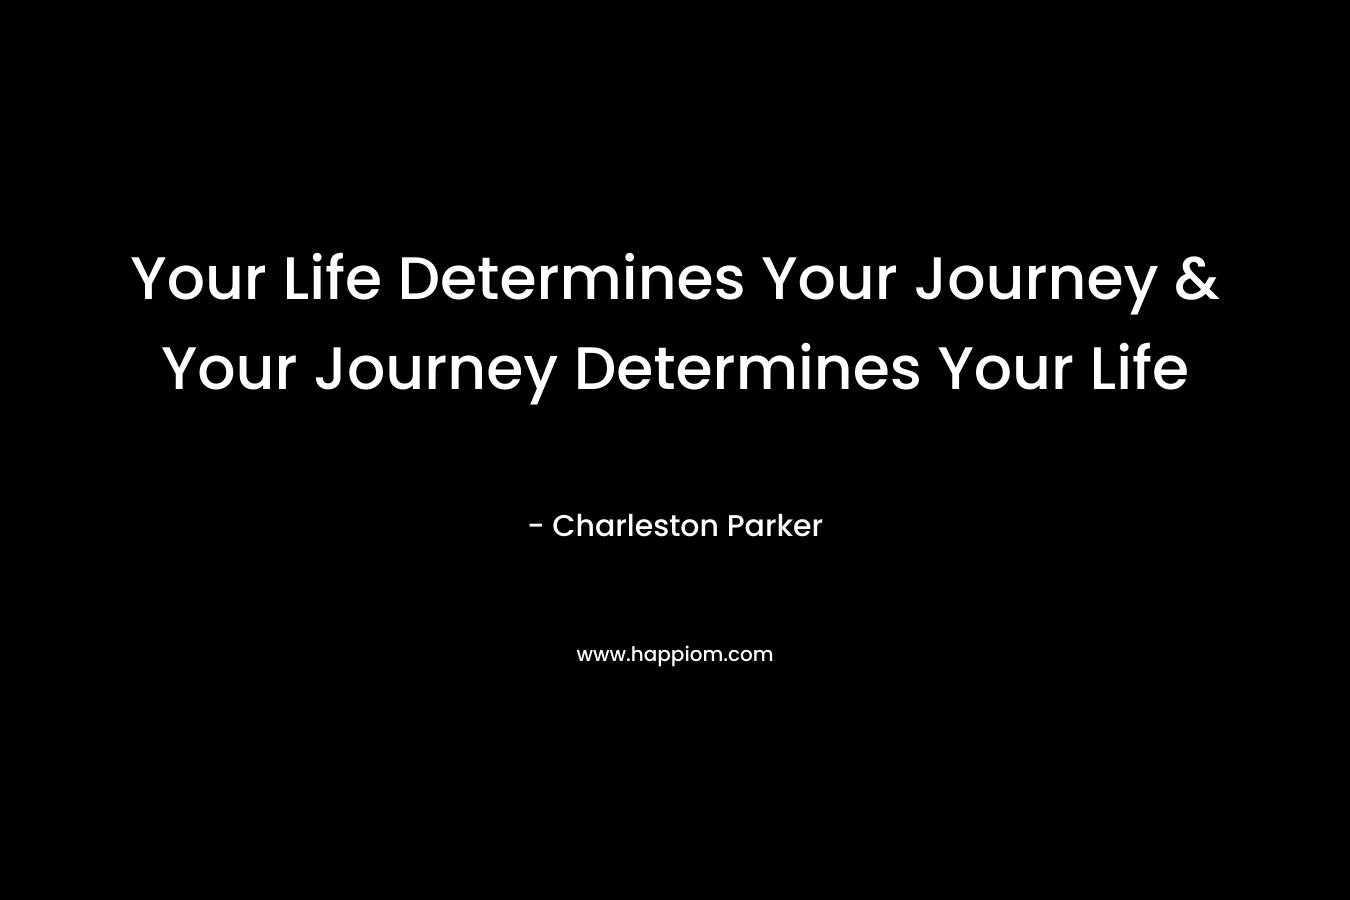 Your Life Determines Your Journey & Your Journey Determines Your Life